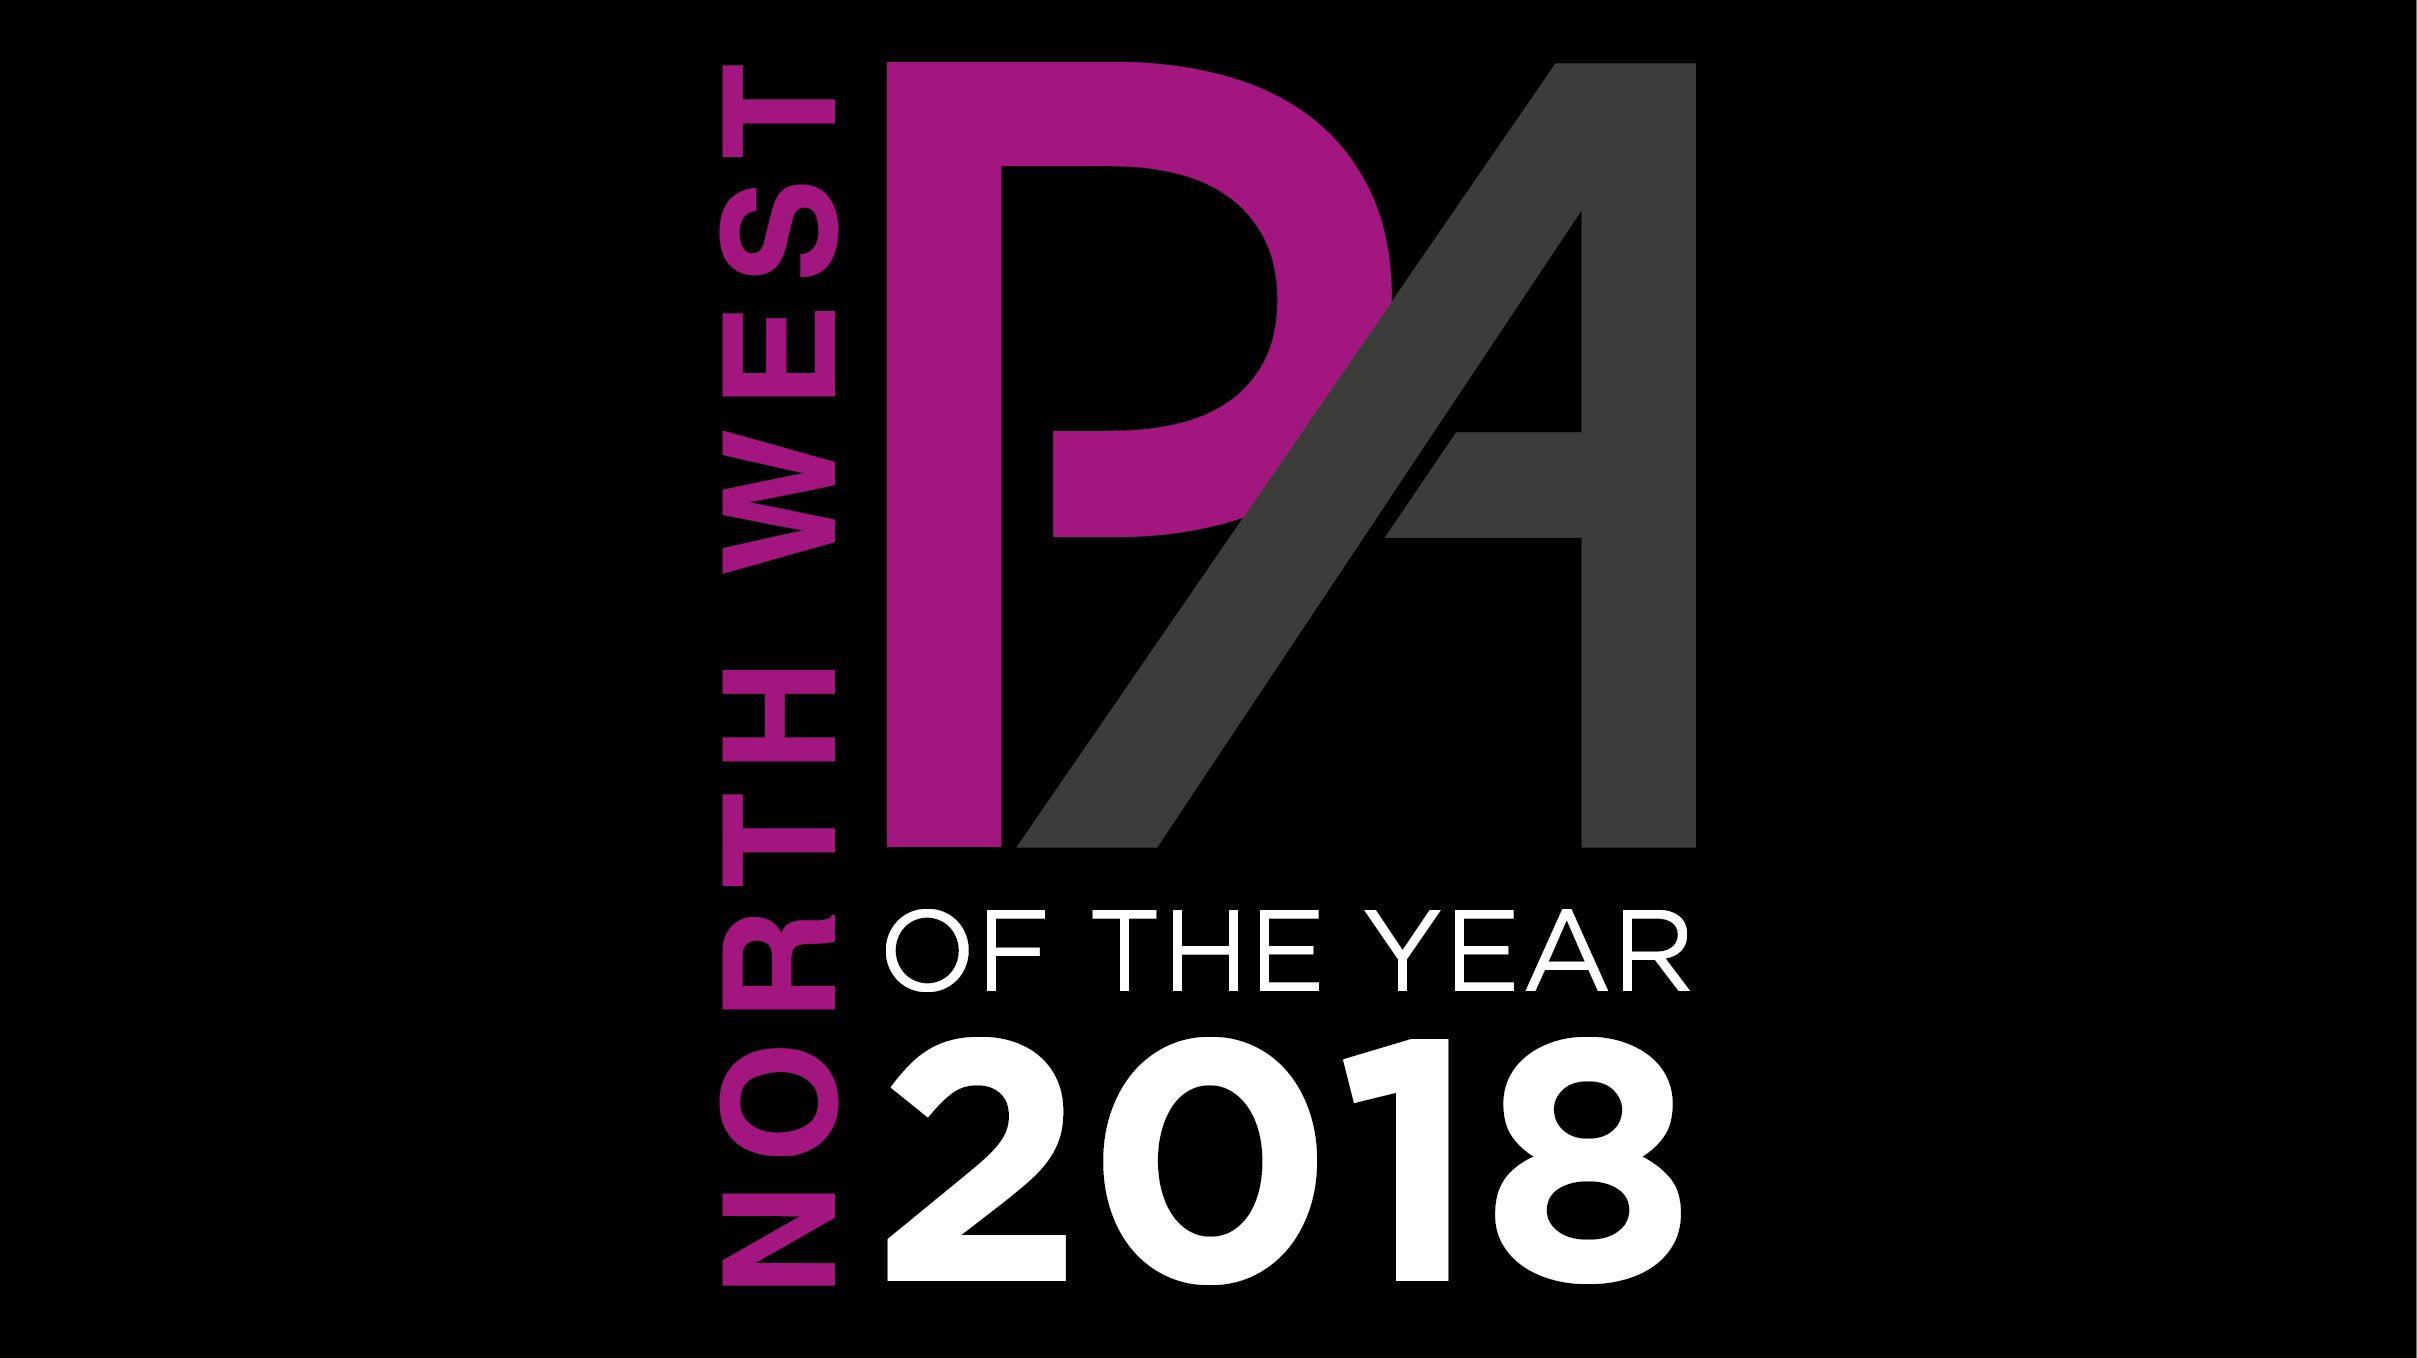 Year 2018 Logo - 2018 North West PA of the Year Awards